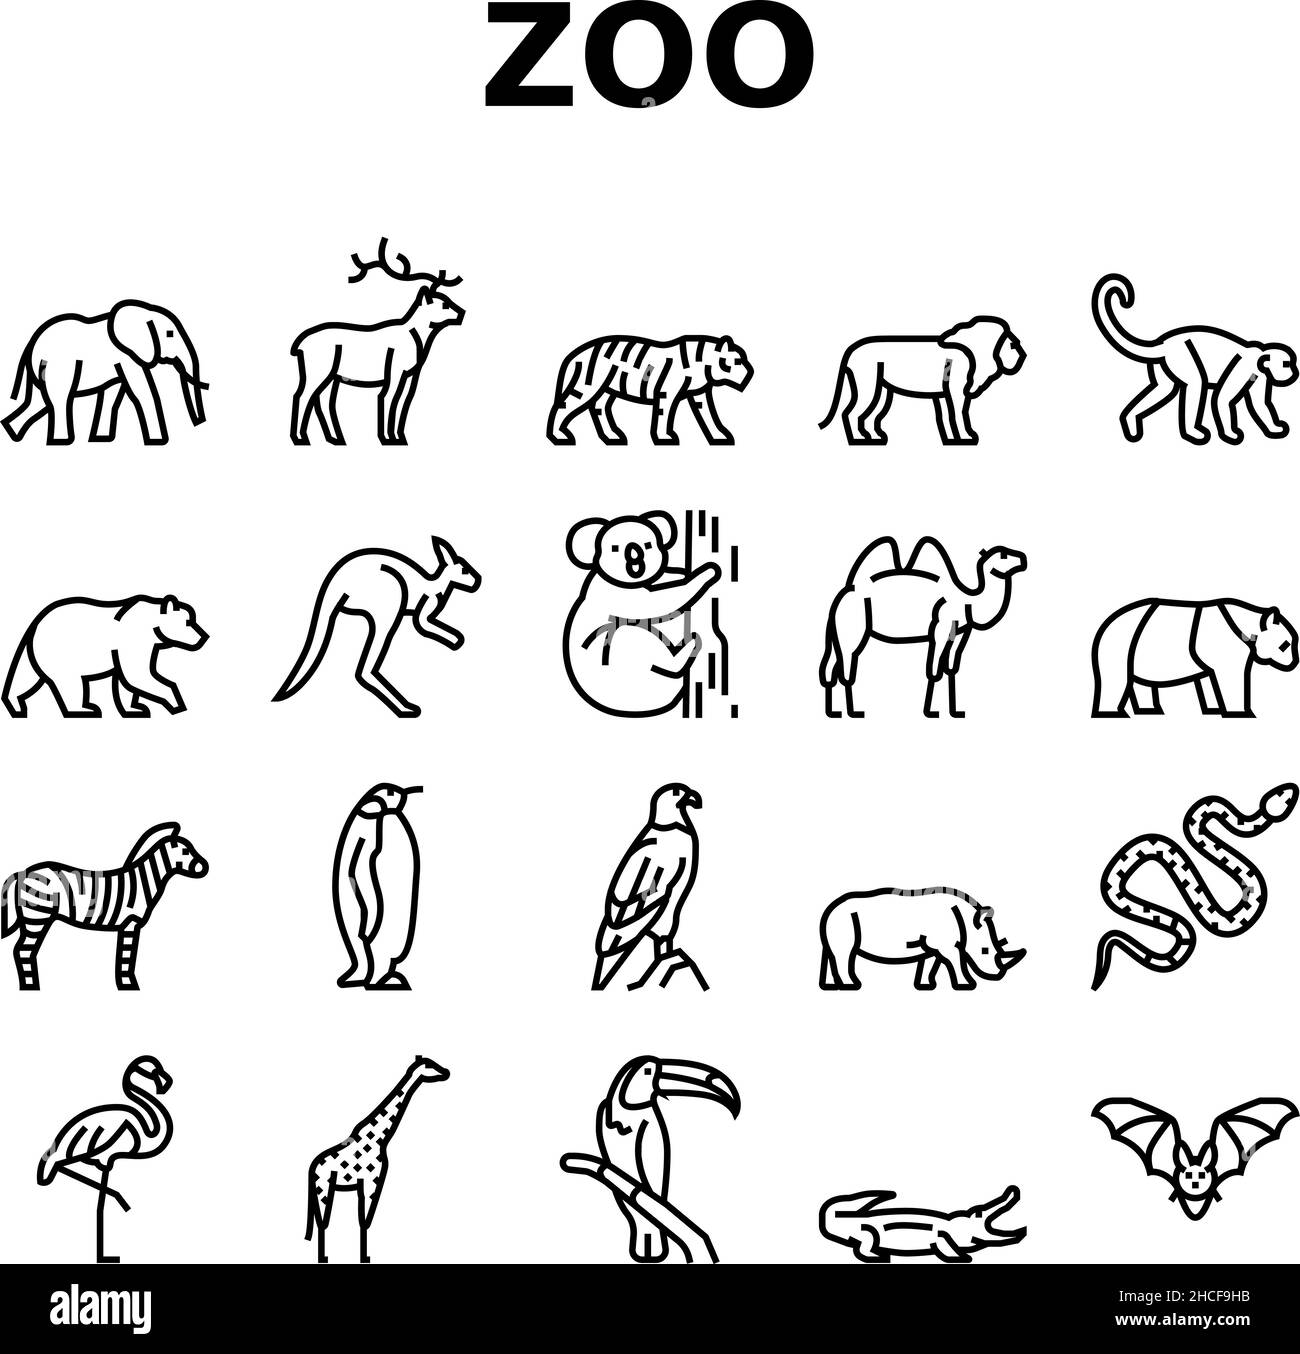 Zoo Animals, Birds And Snakes Icons Set Vector Stock Vector